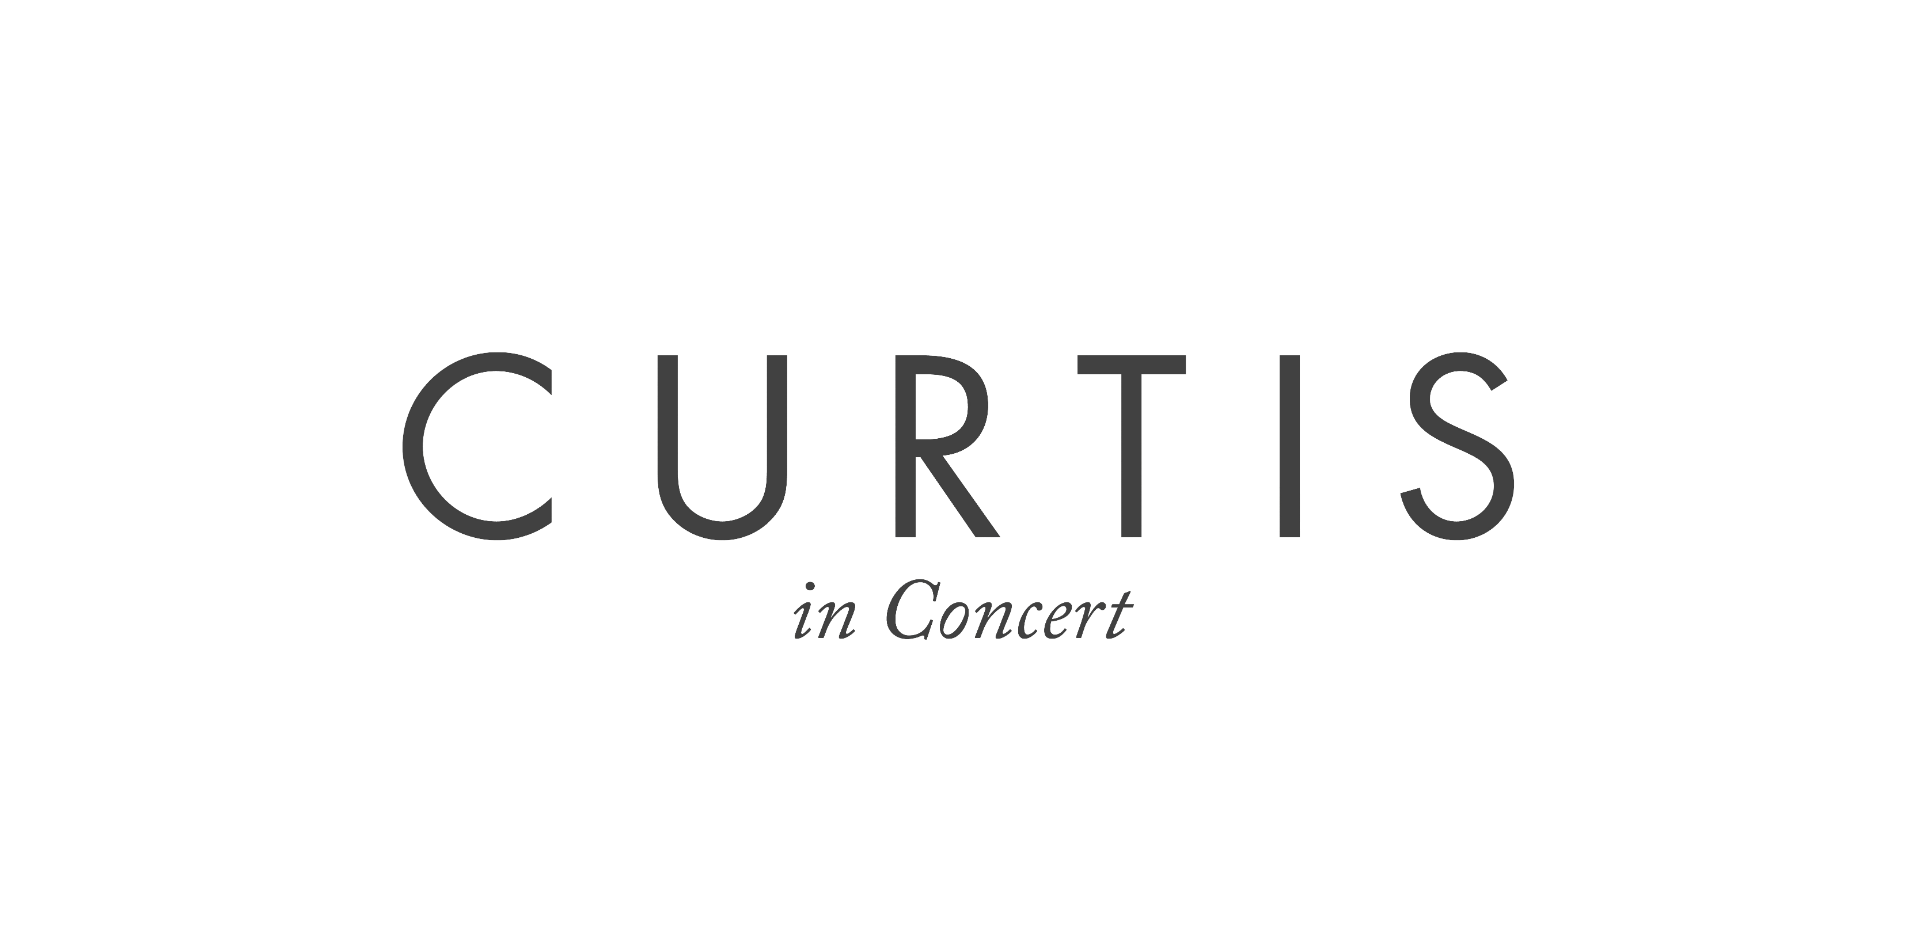 Curtis in Concert